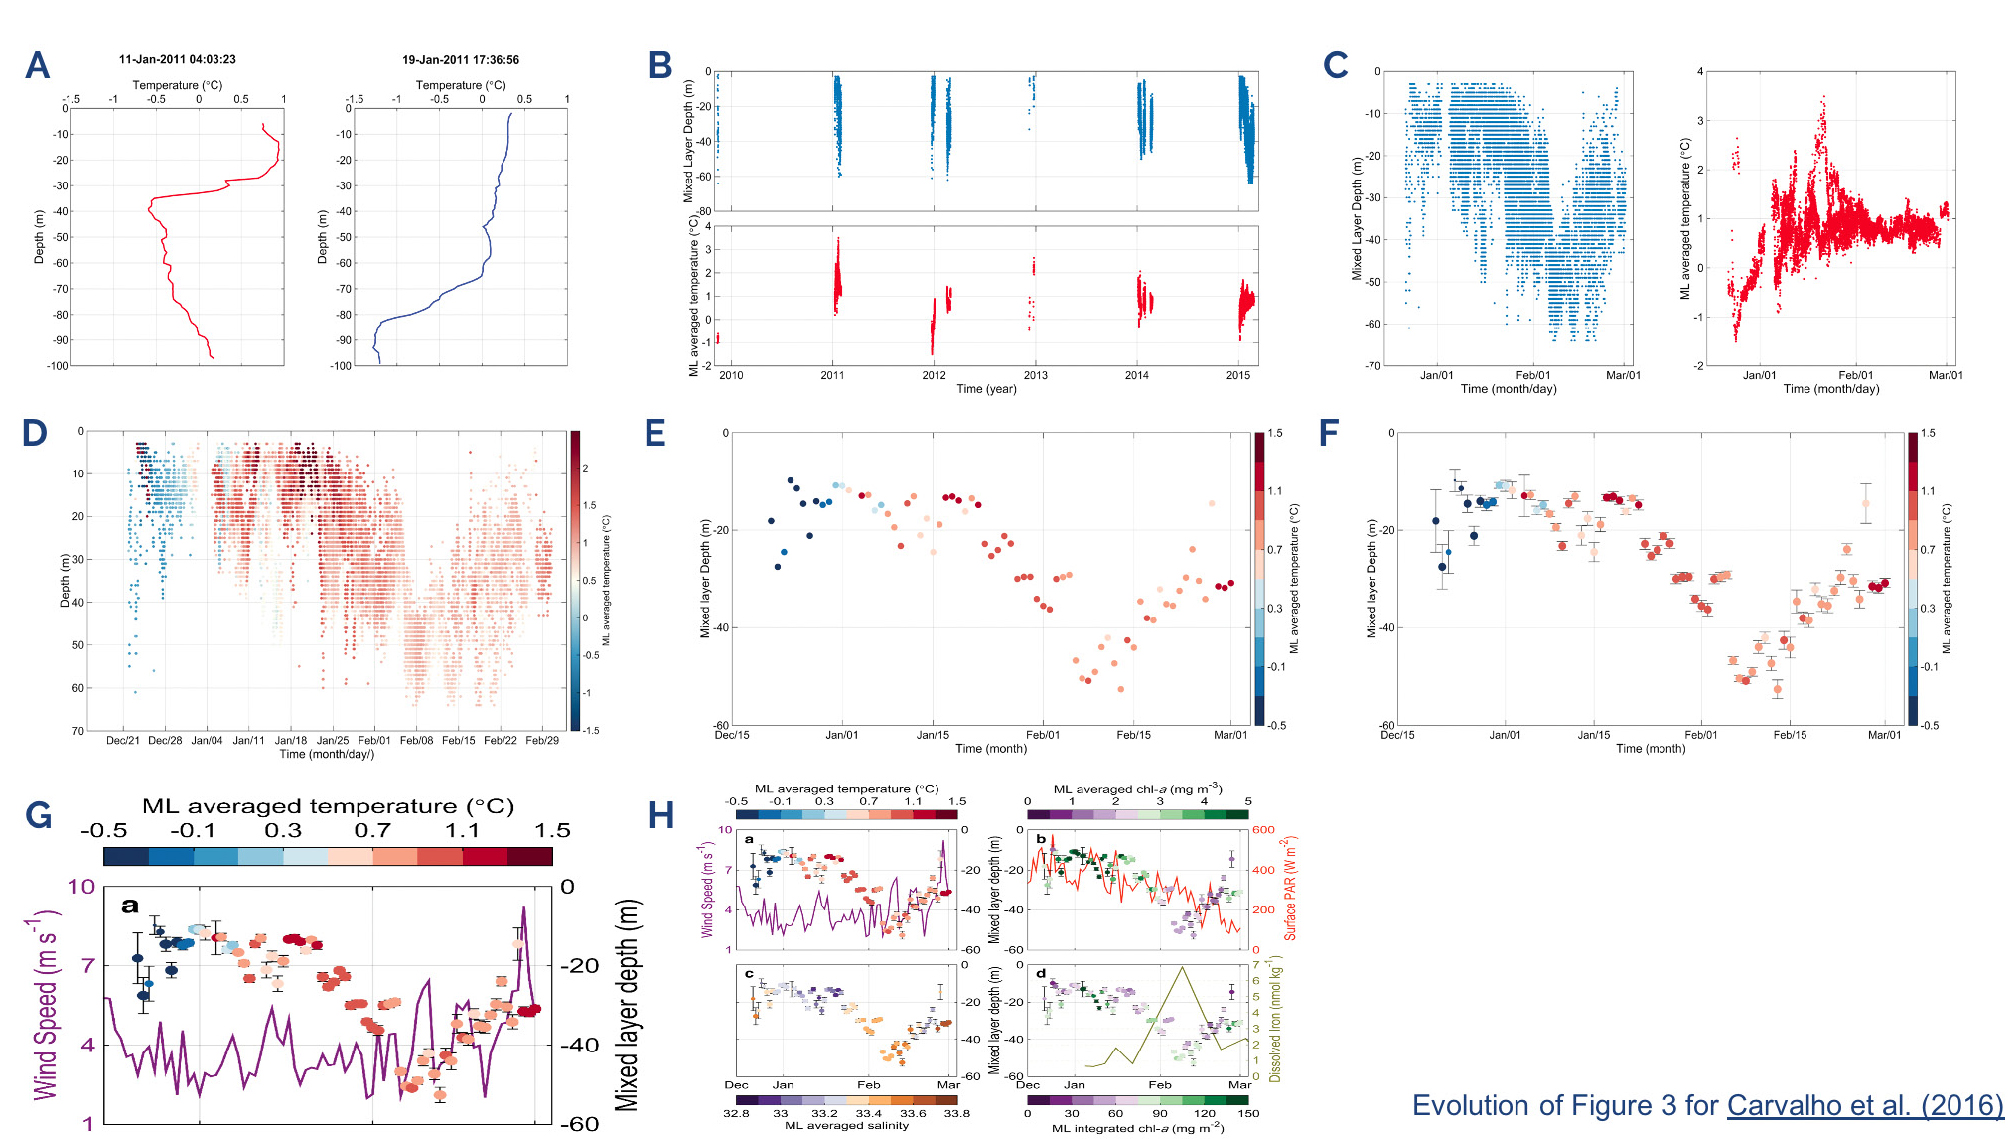 Figure 3. Evolution of Figure 3 from Carvalho et al. (2016) article. (A) individual profiles from each glider dive, (B) all data available across five years of project, (C) data by day of the month with year removed, (D) data combined on one graph with y-axis position and color to represent each, (E) average values for each day of the month, (F) inclusion of standard error around both averages, (G) overlay wind speed data, (H) published Figure 3 (see Online Resources for link to graphs and write-up).